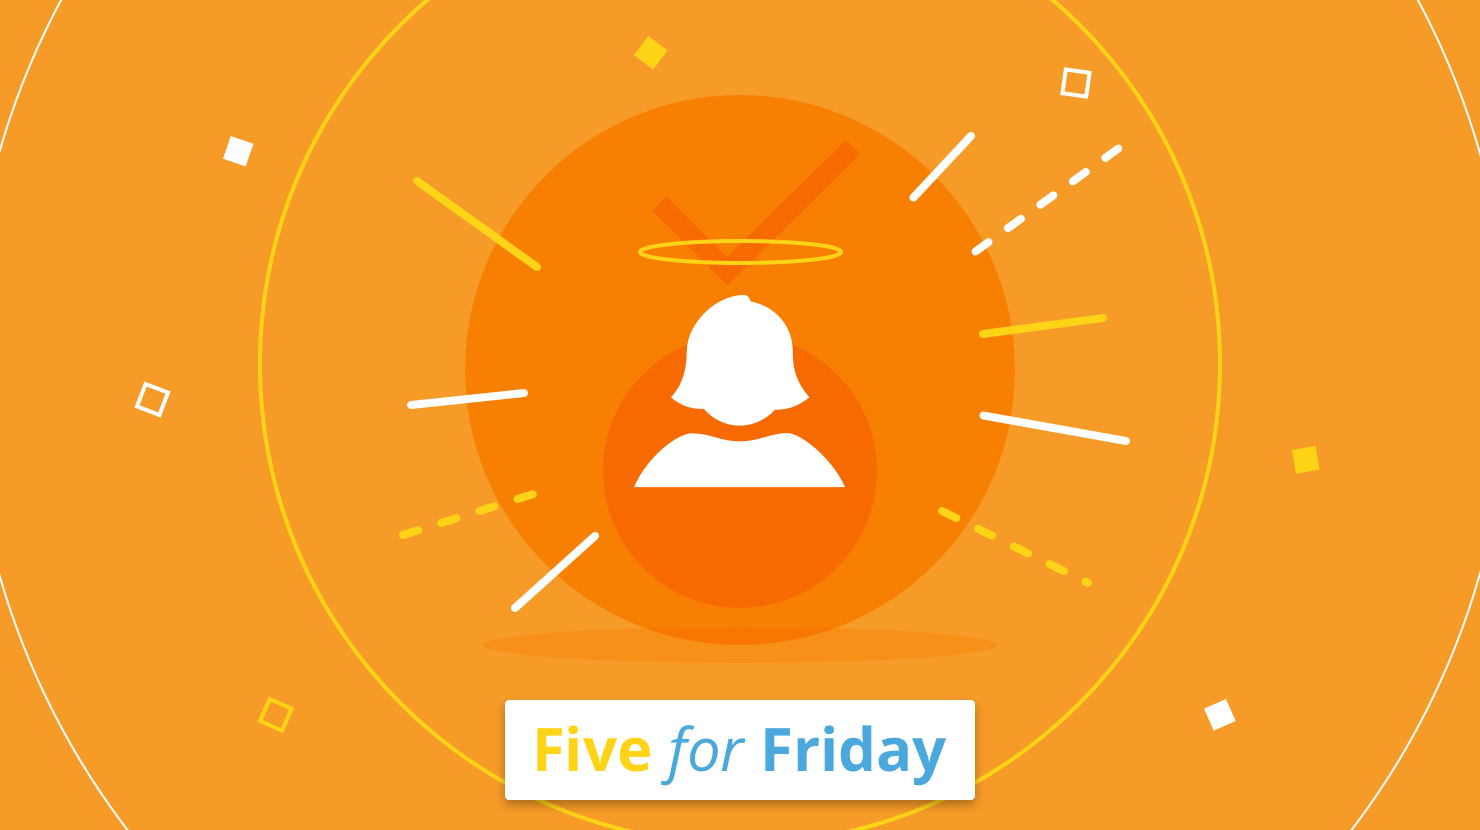 Five for Friday: Your ego at work